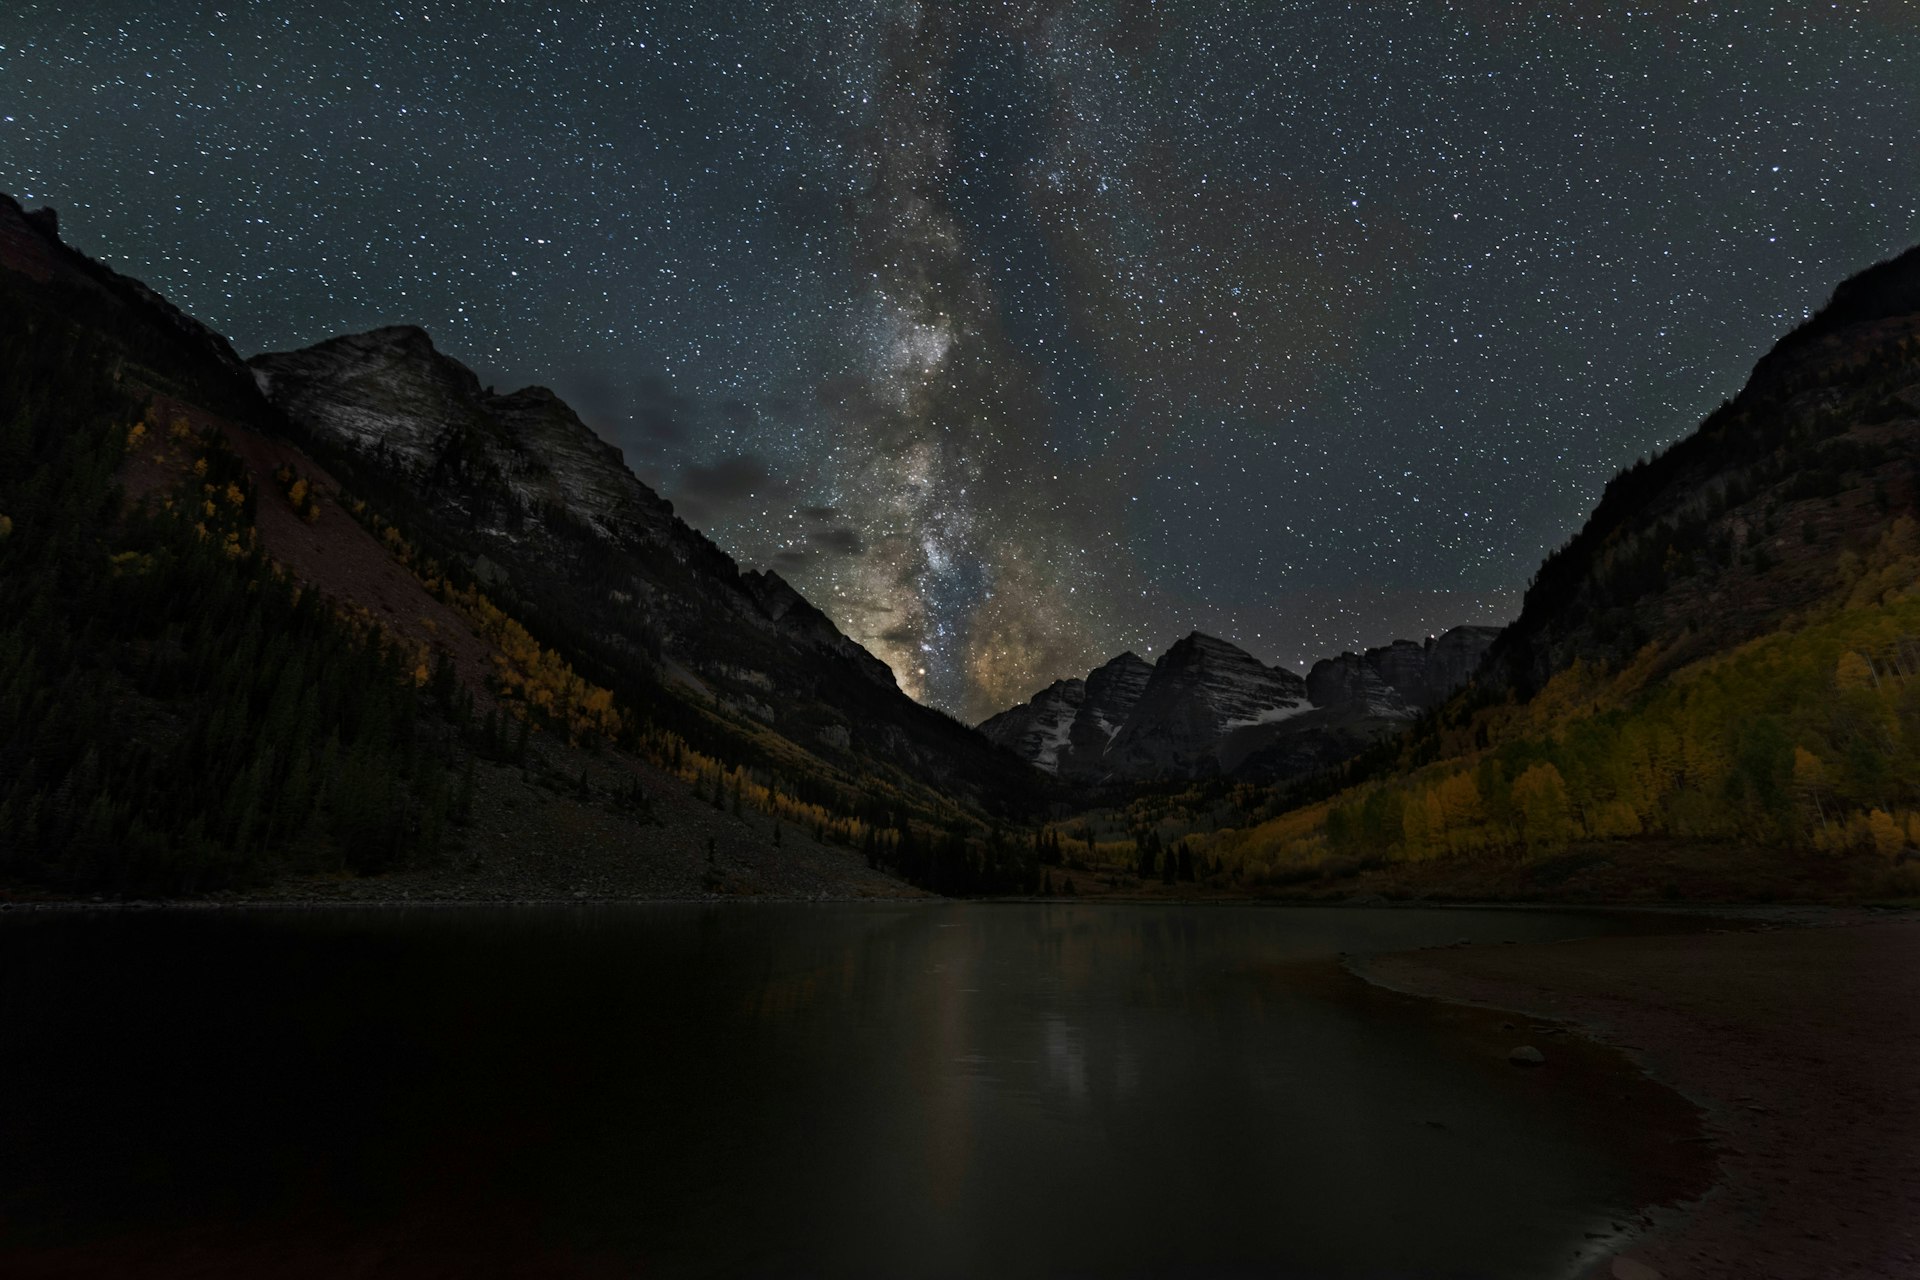 USA, Colorado, White River National Forest. The Milky Way glows above Maroon Bells at night.